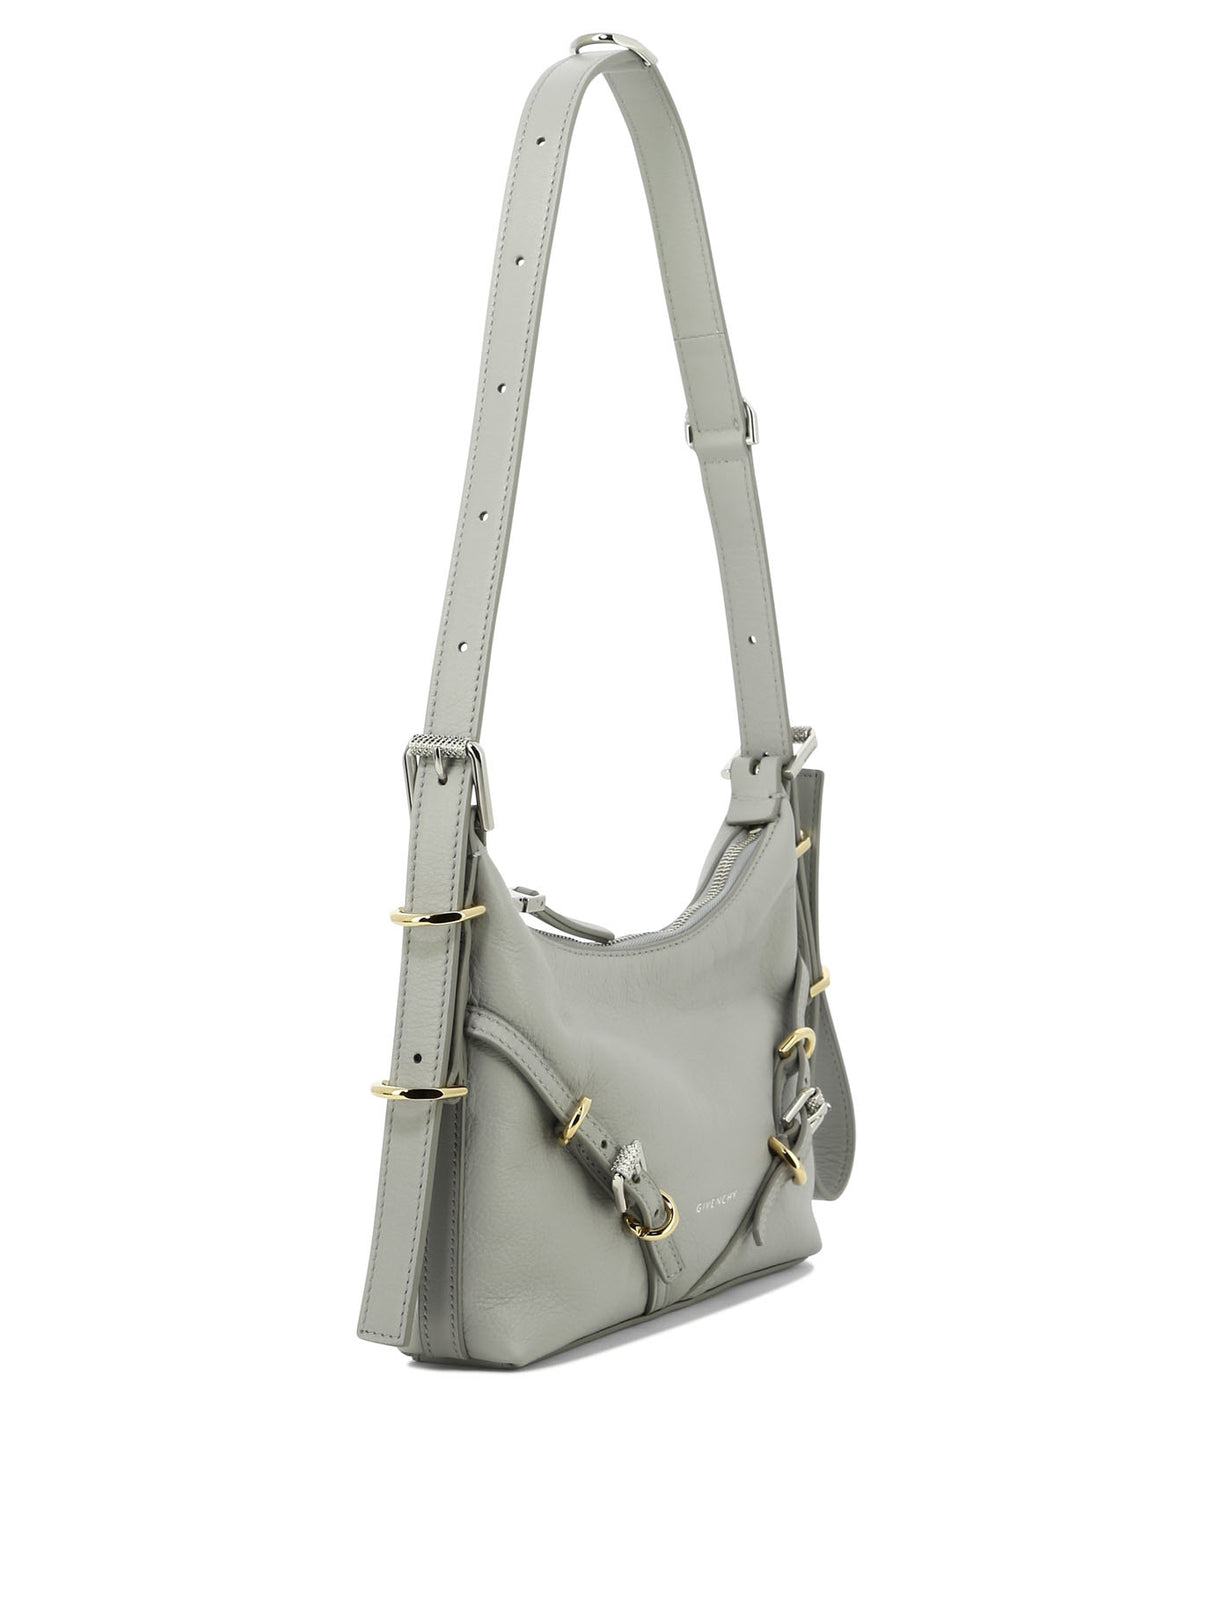 GIVENCHY "Mini Voyager" Gray Leather Crossbody Bag with Adjustable Strap and Metallic Accents